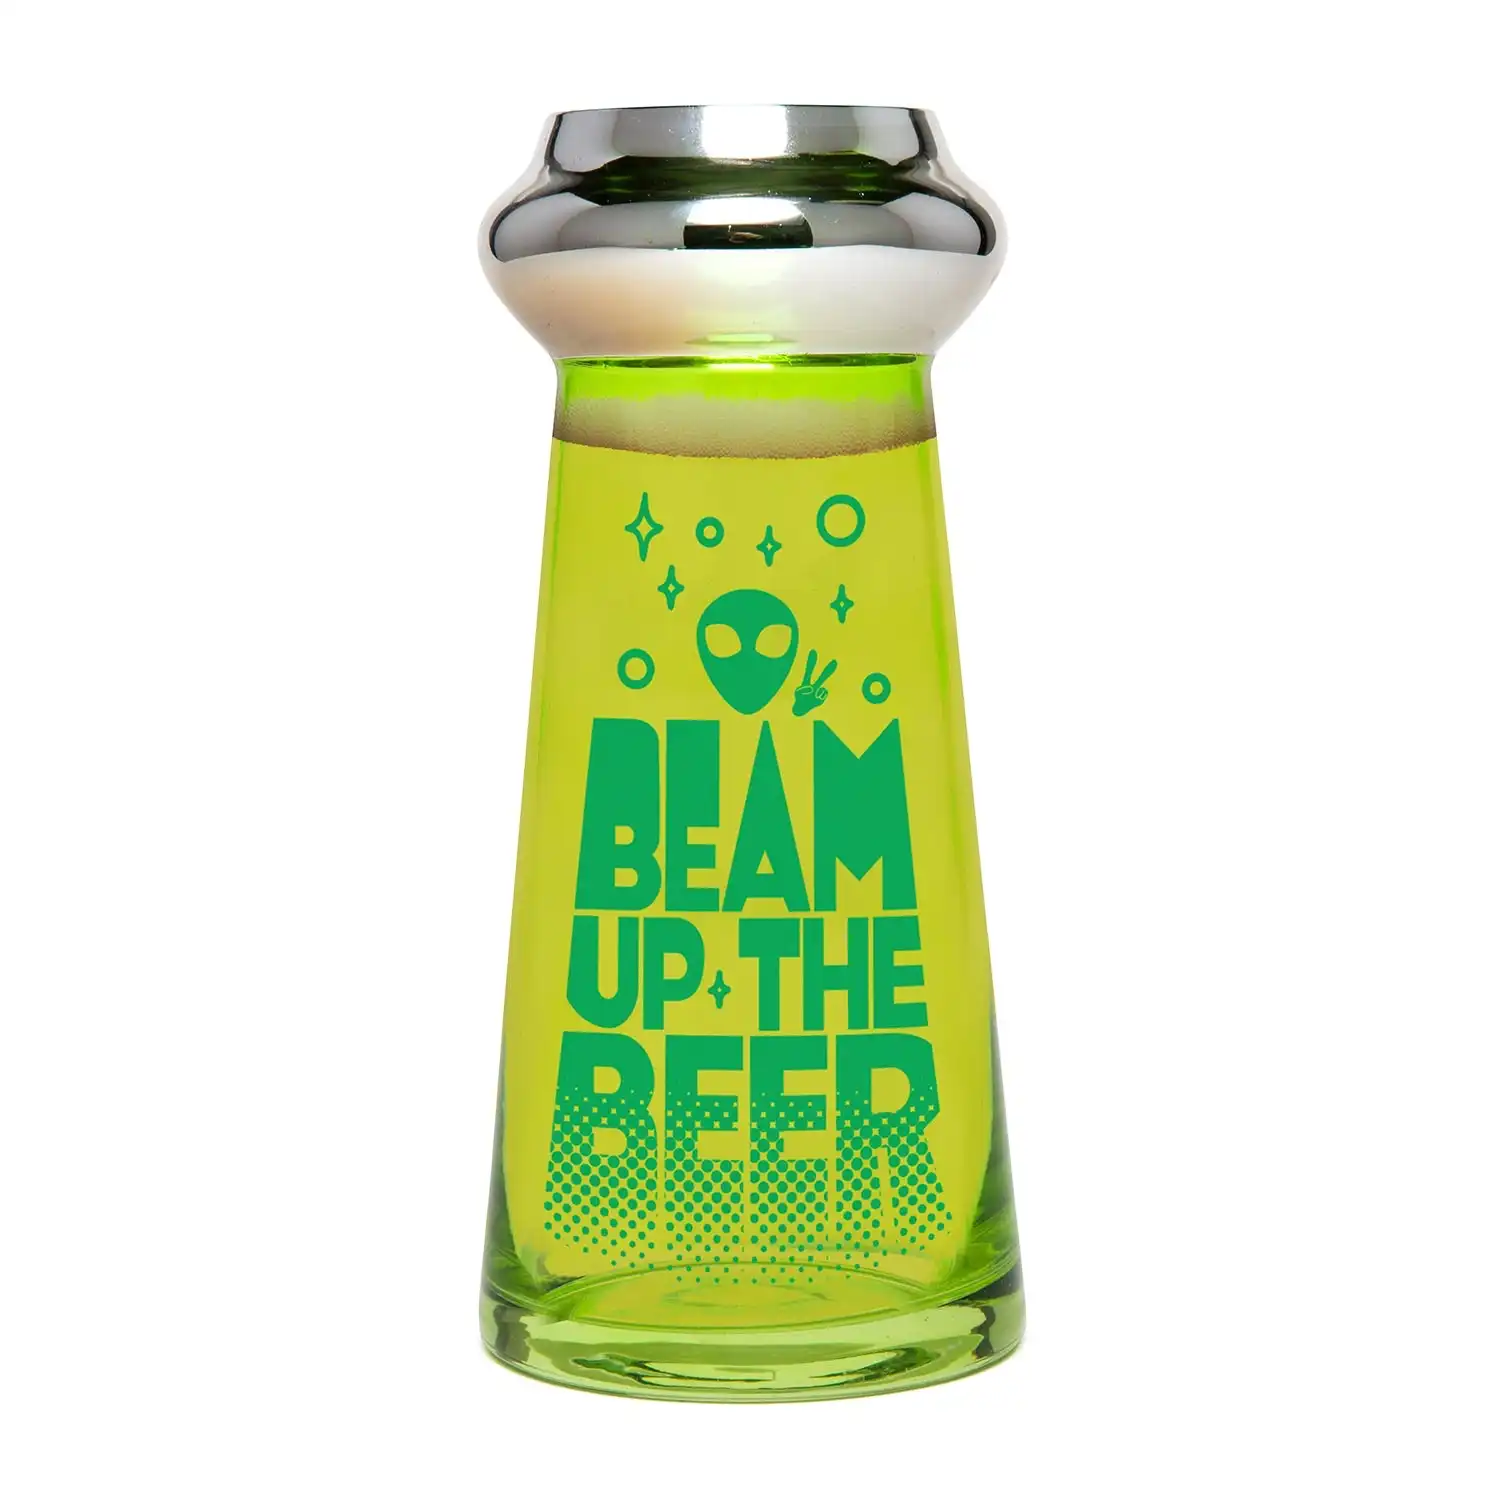 Bigmouth - UFO Beer Glass: Beam Up the Beer